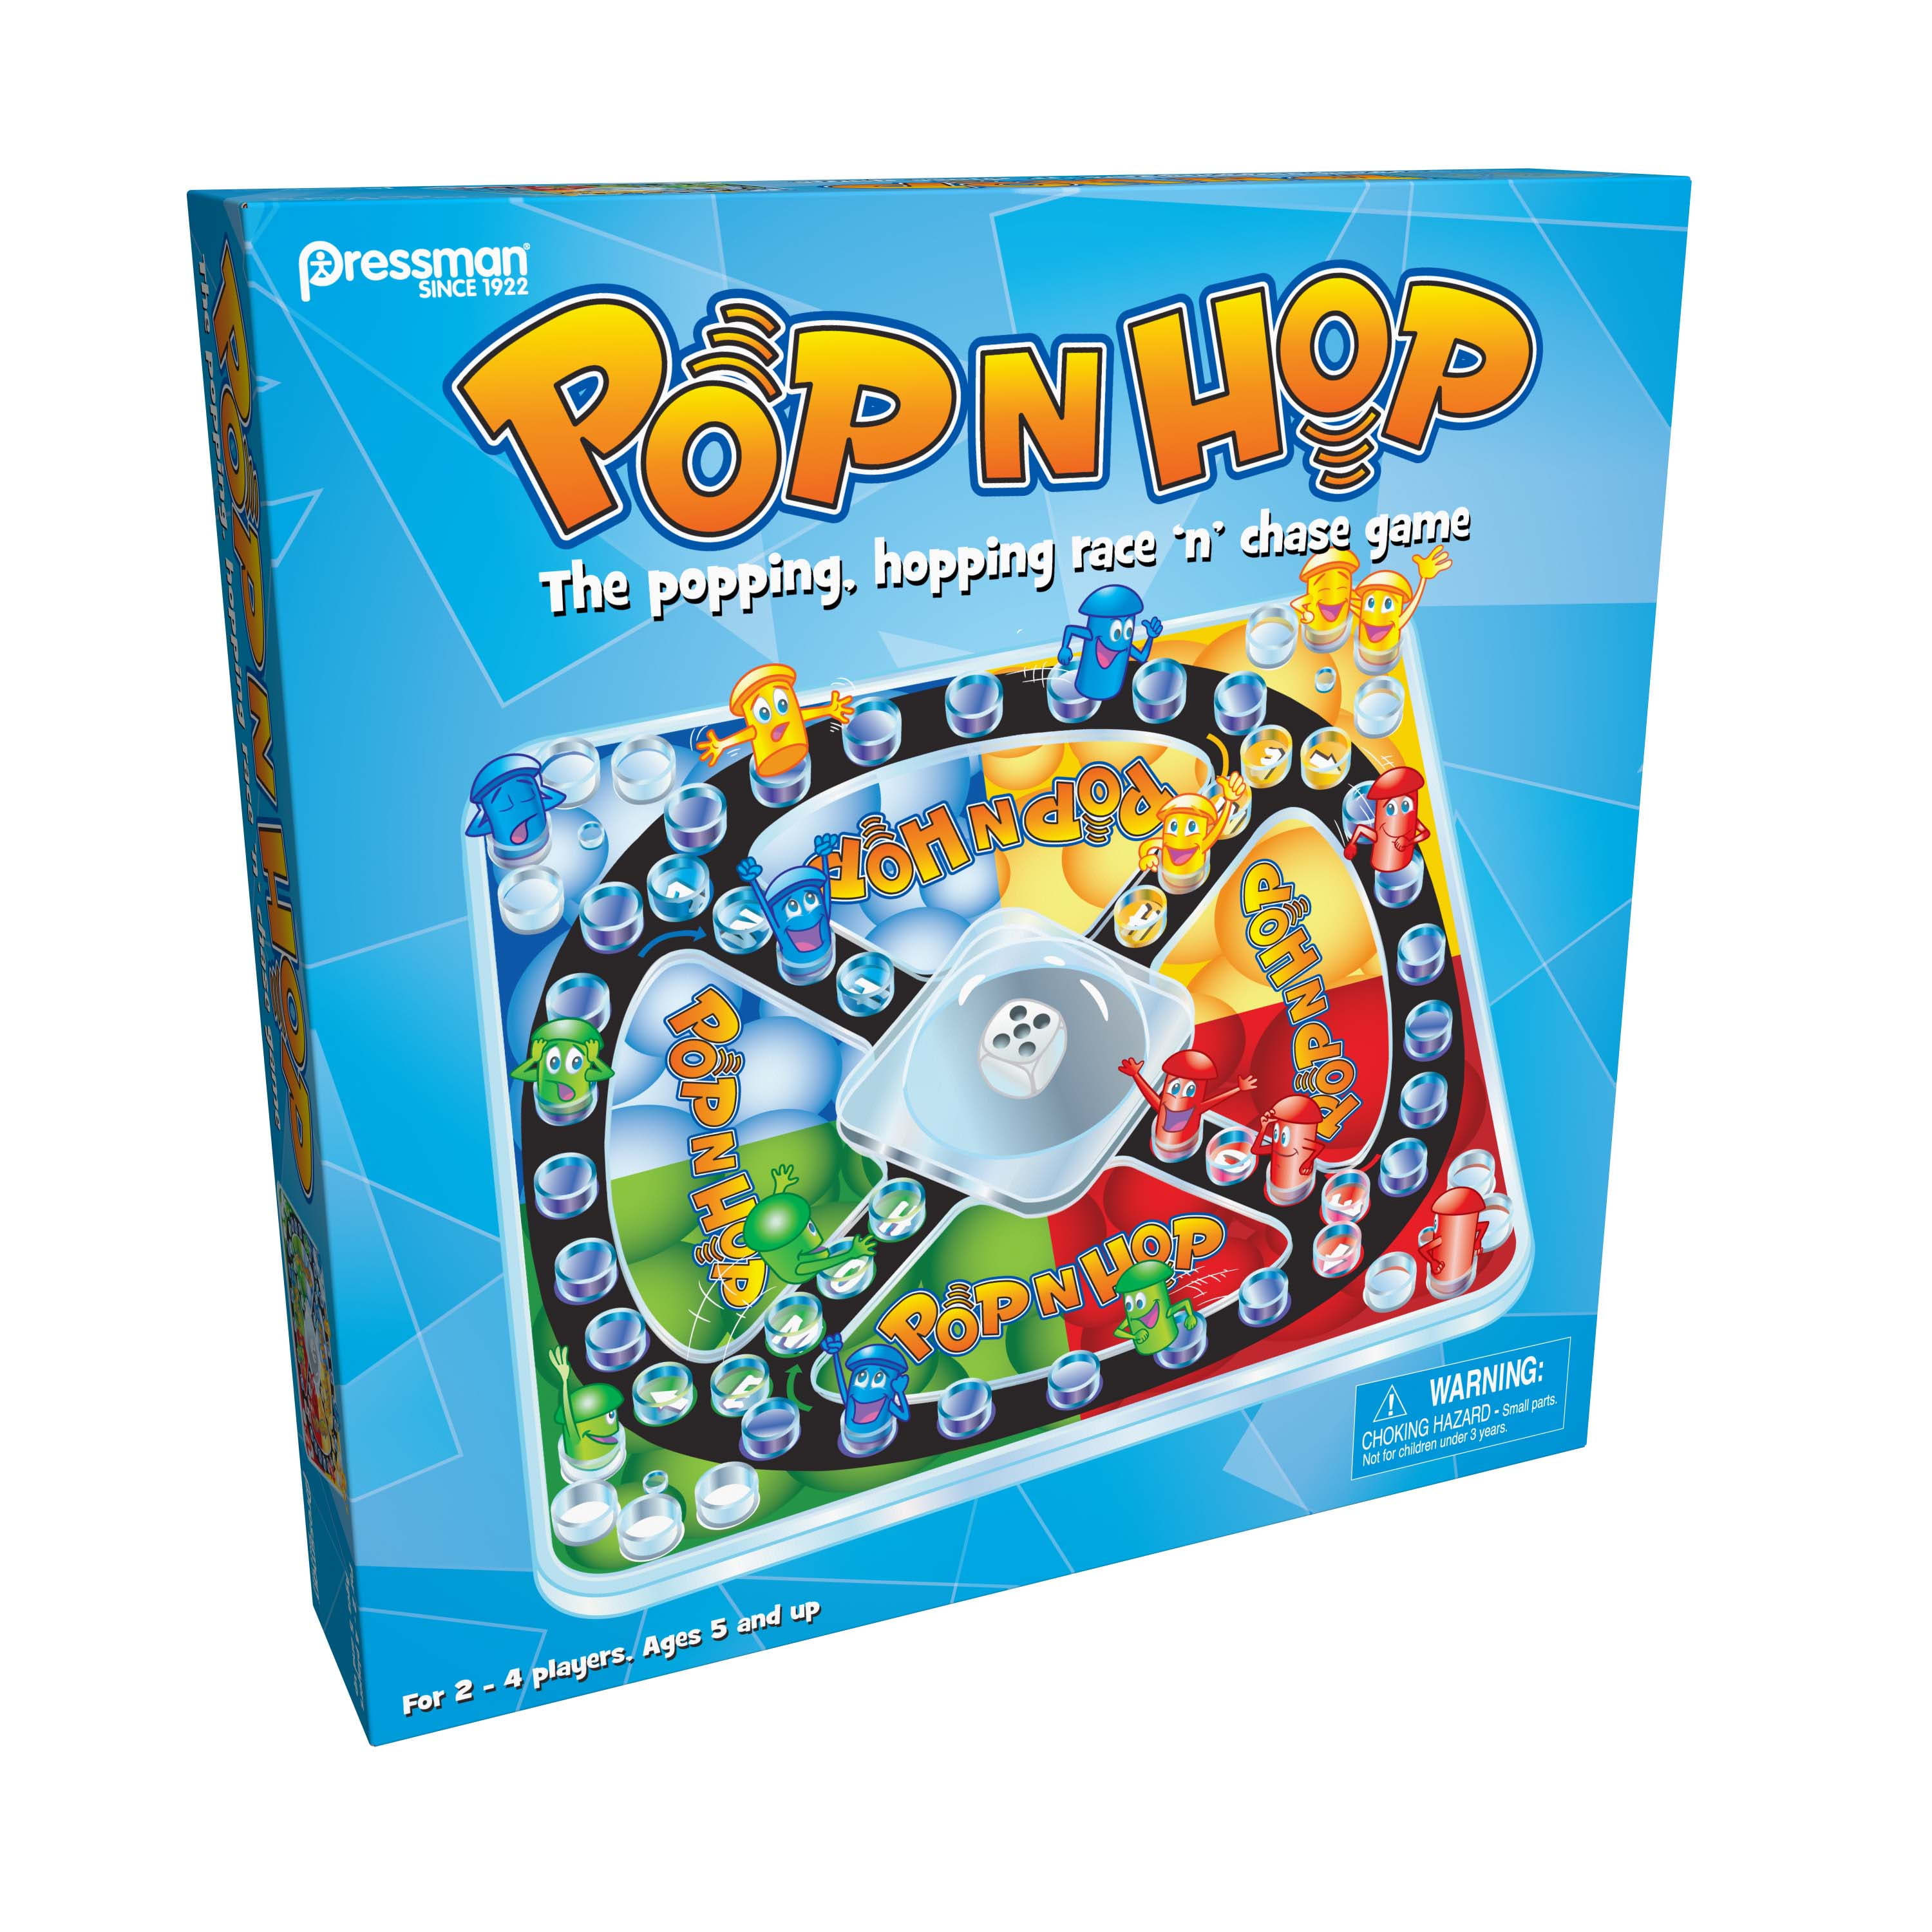 thomas and friends pop up game